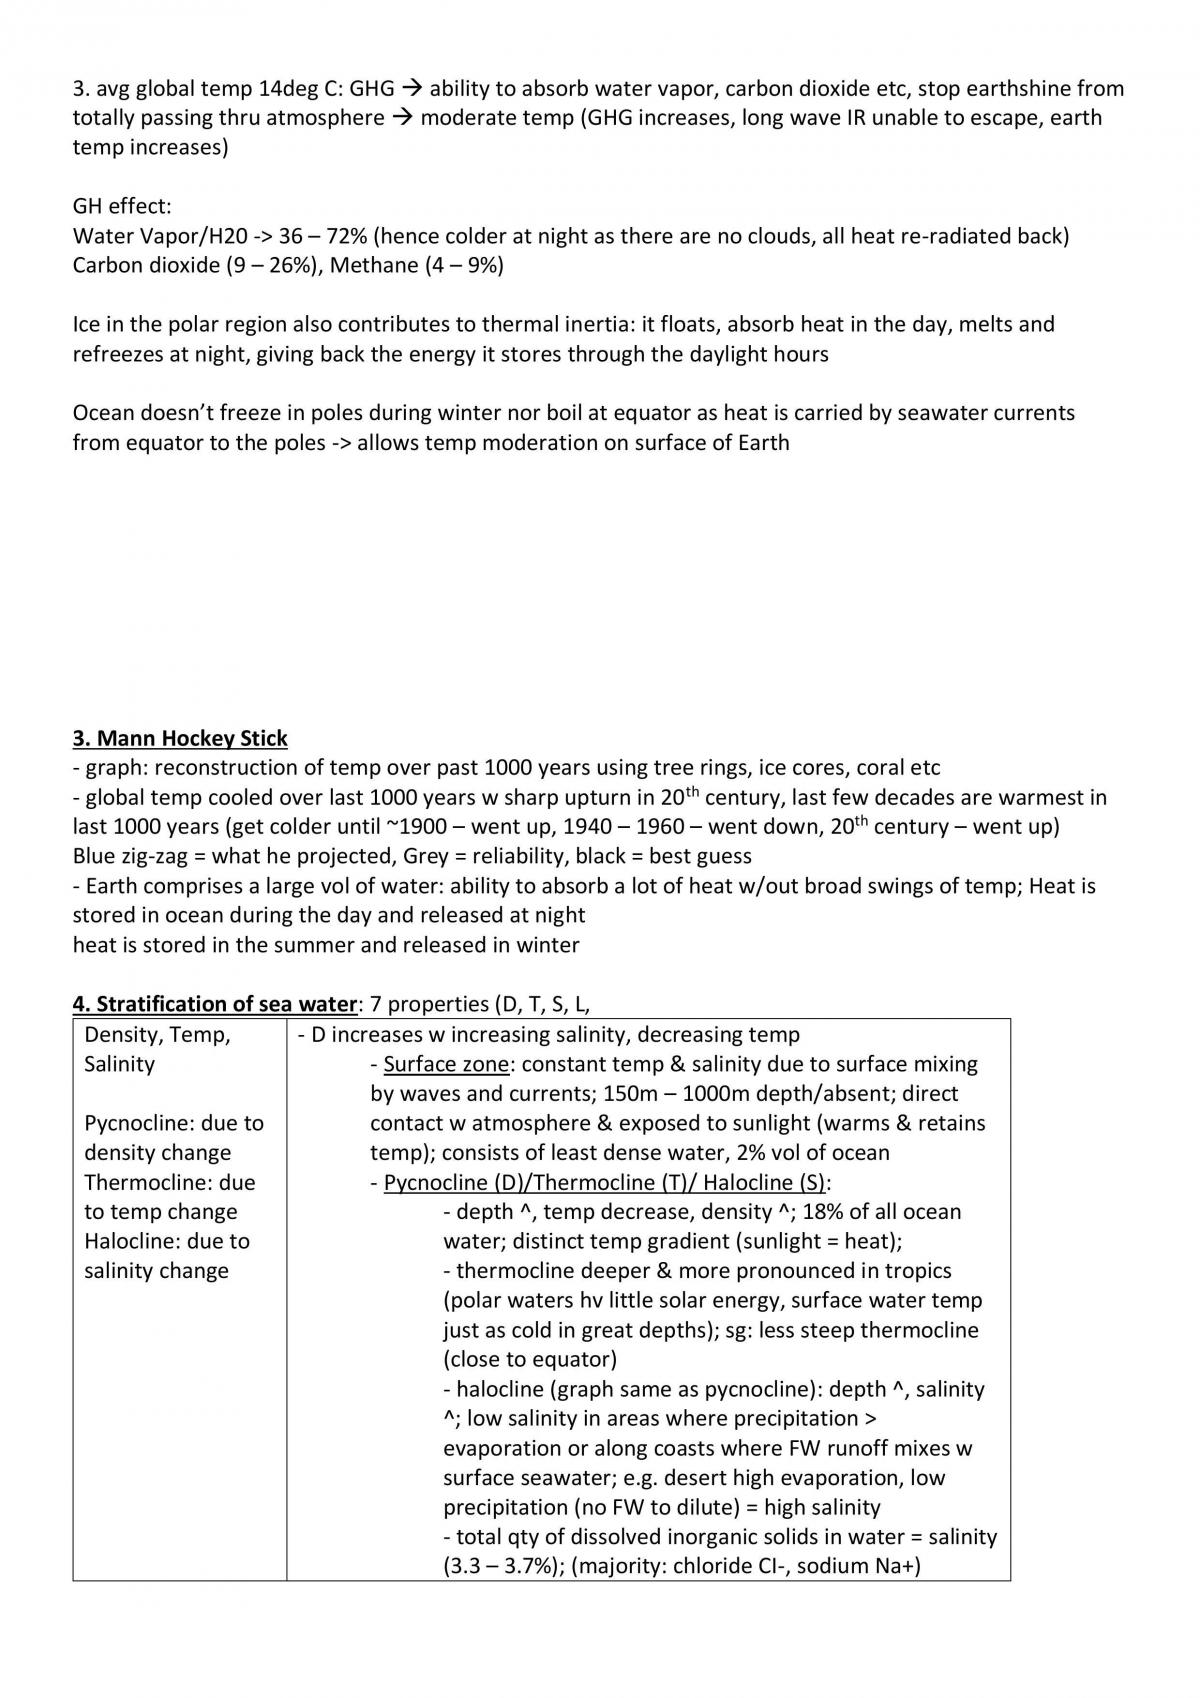 MT1004 Introduction to Meteorology and Oceanography Full Notes - Page 22